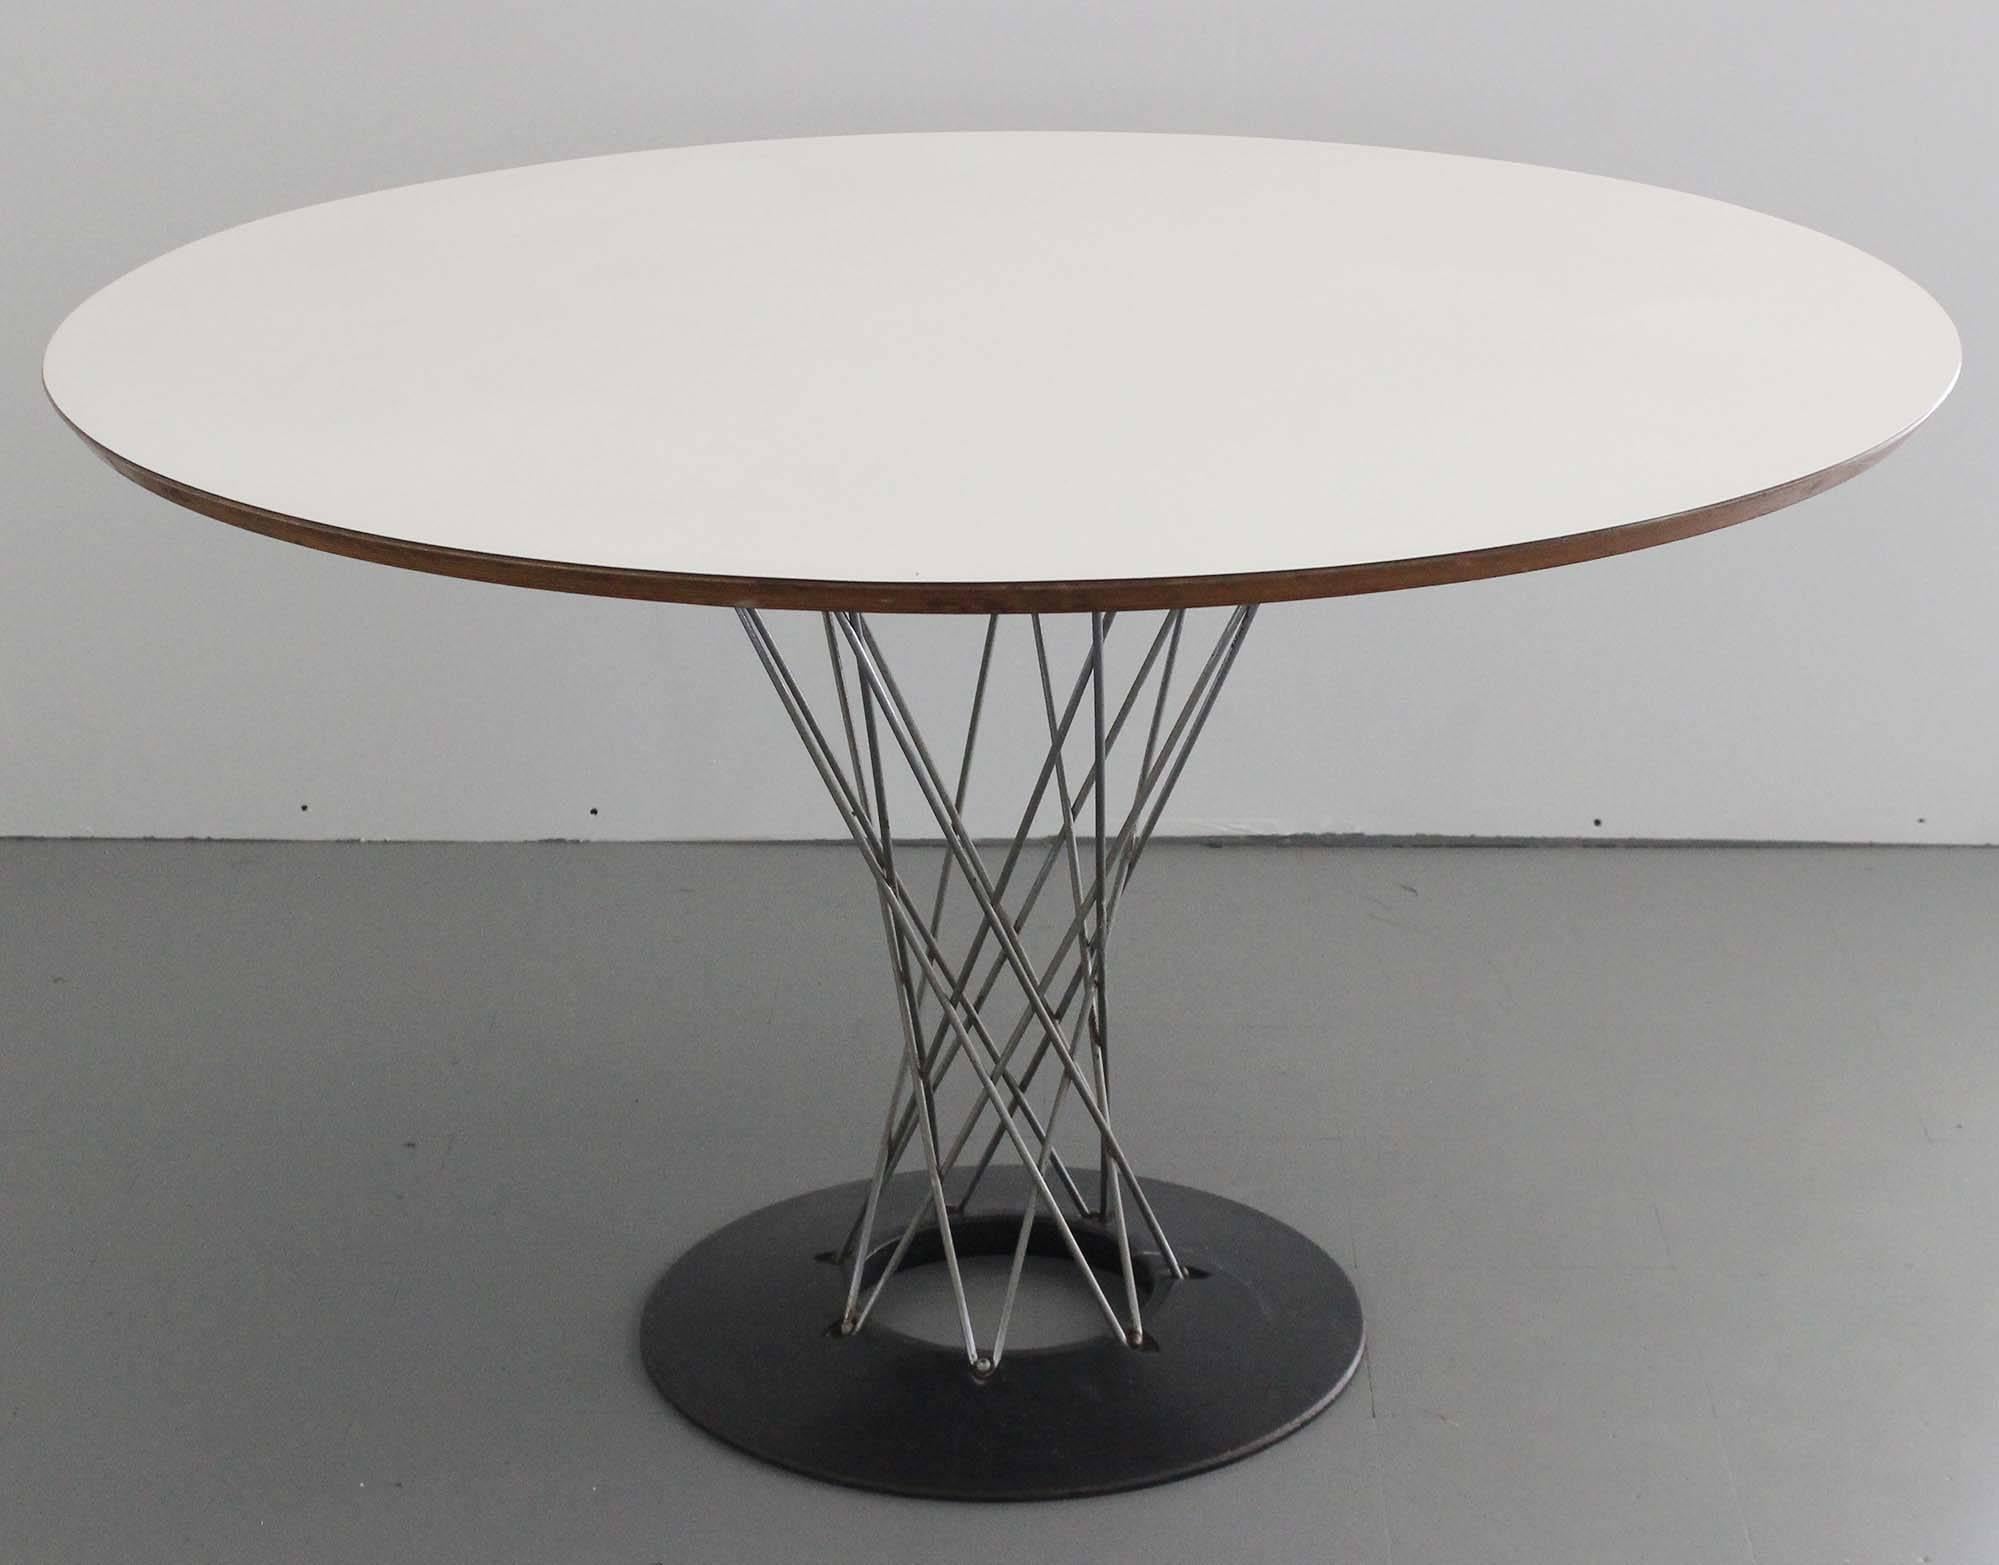 Iconic cyclone table, designed by Isamu Noguchi for knoll.